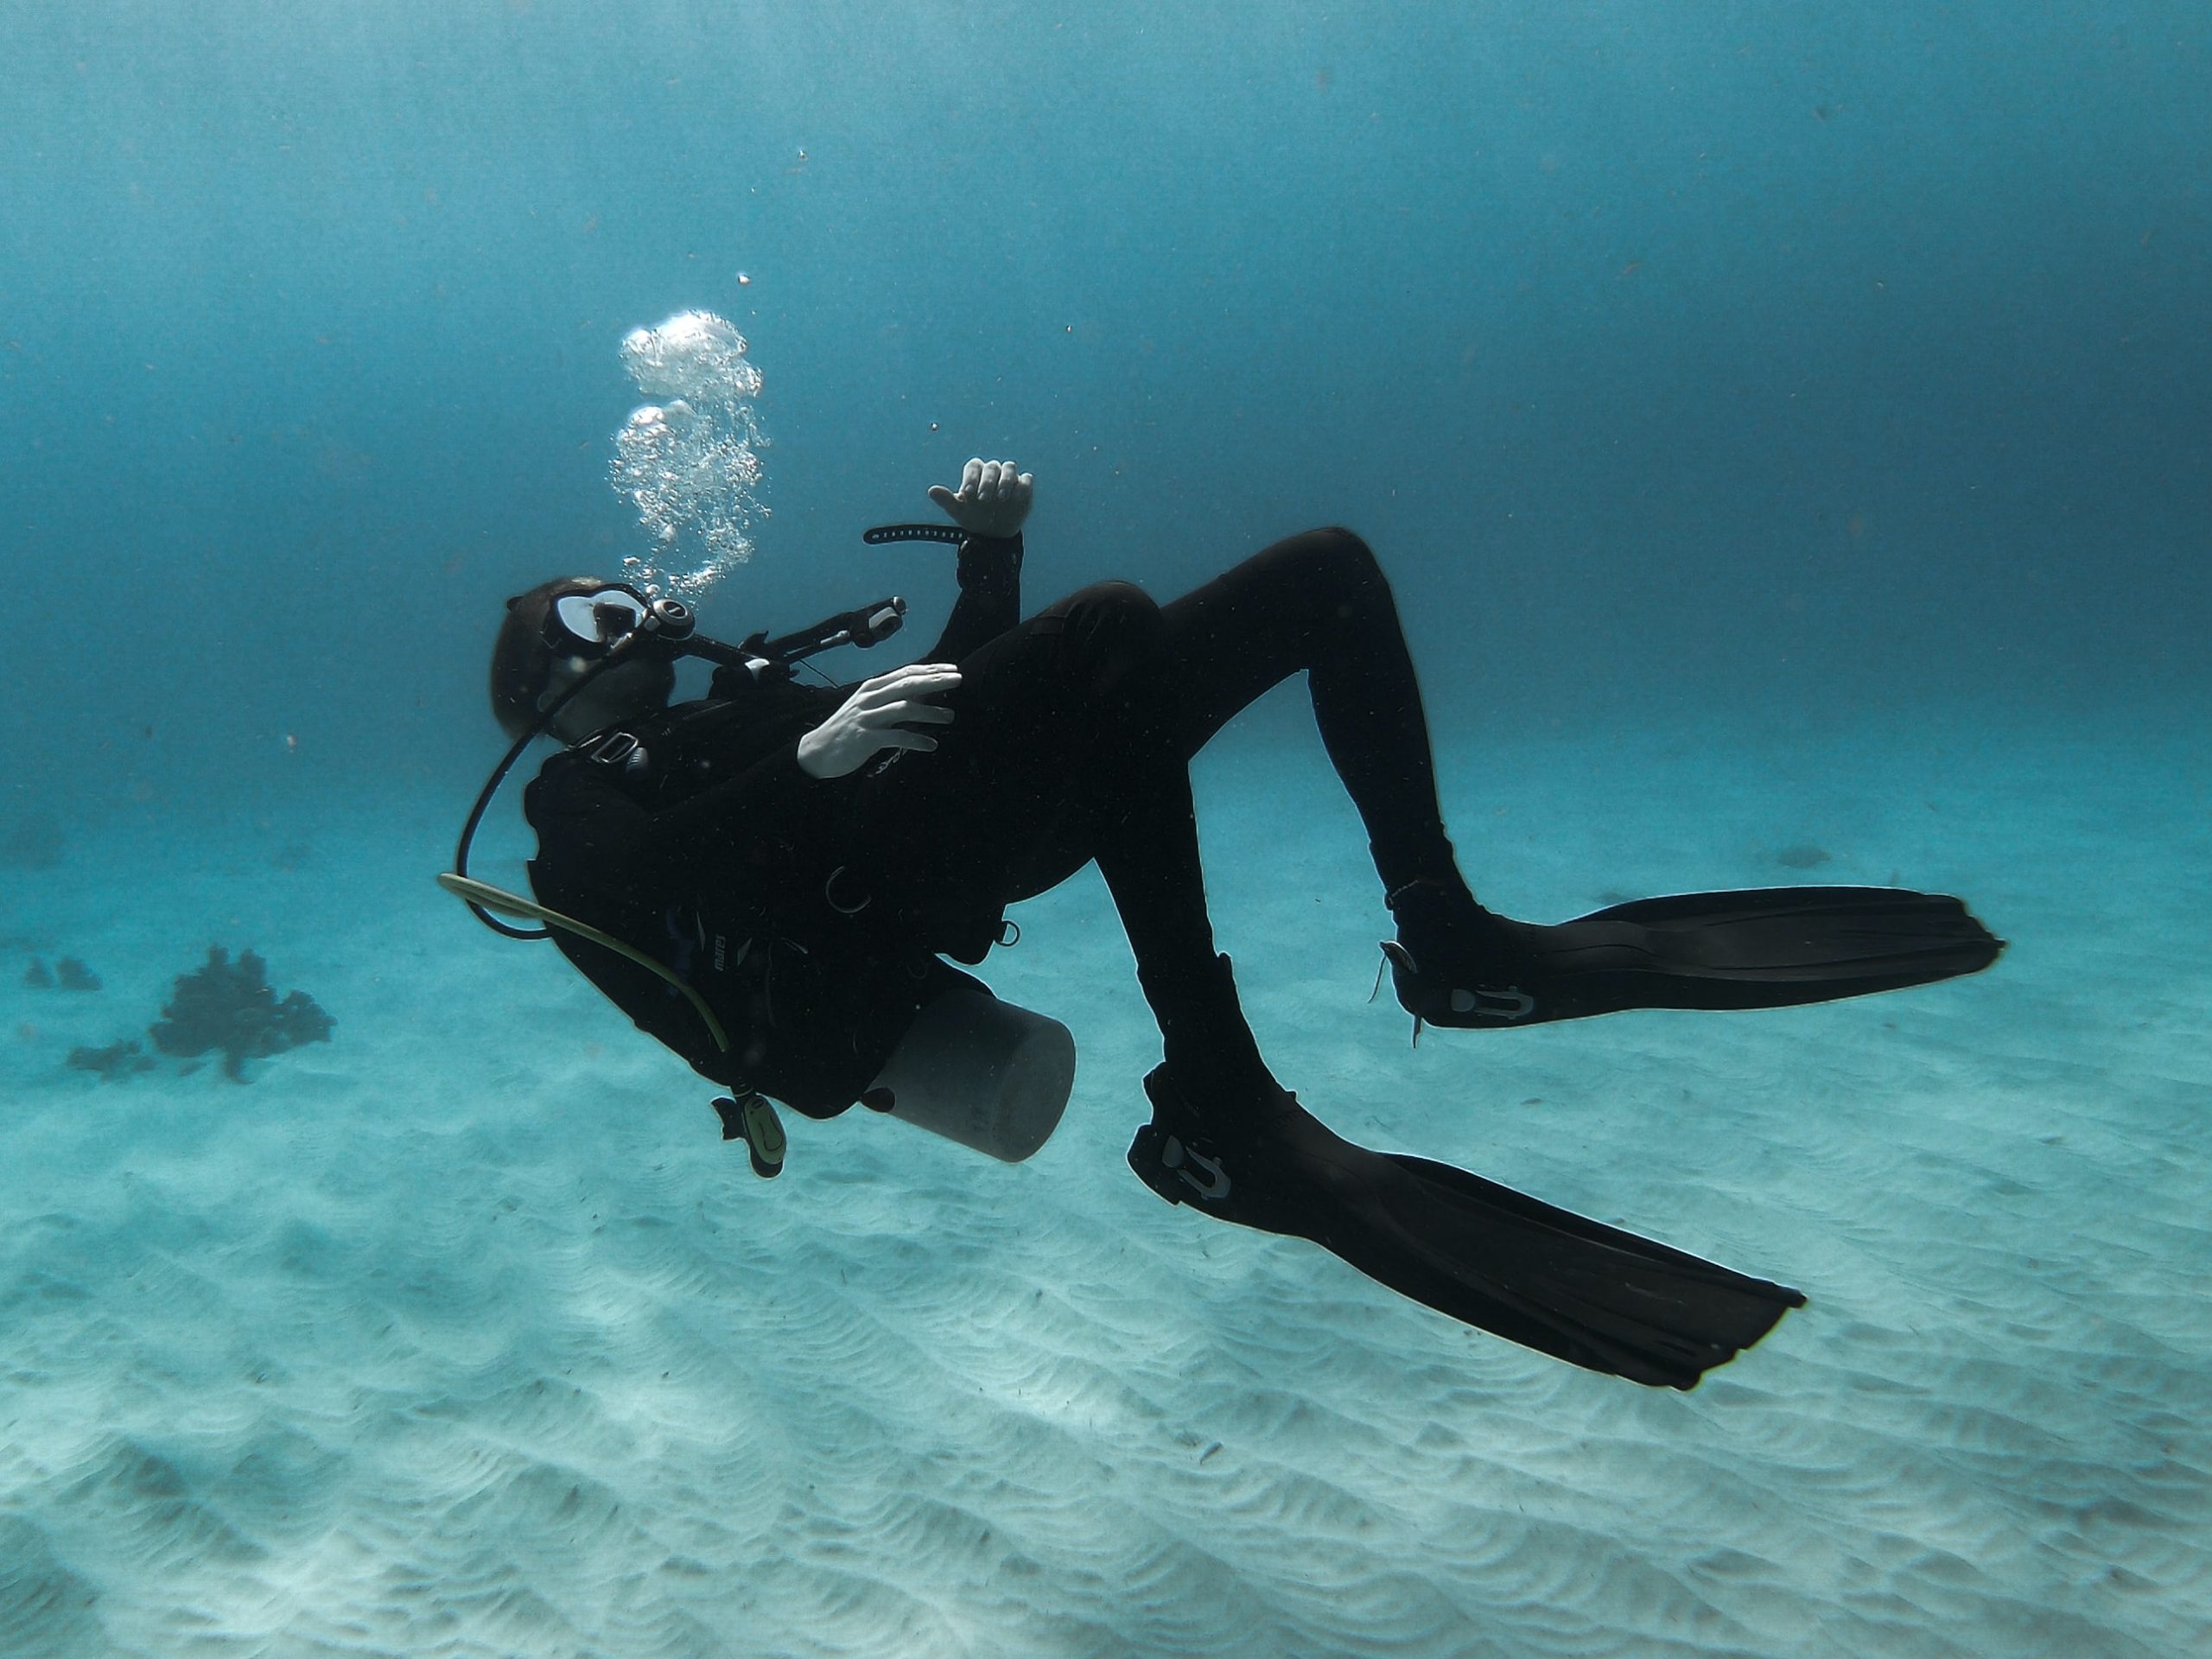 Scuba Diving with Fins